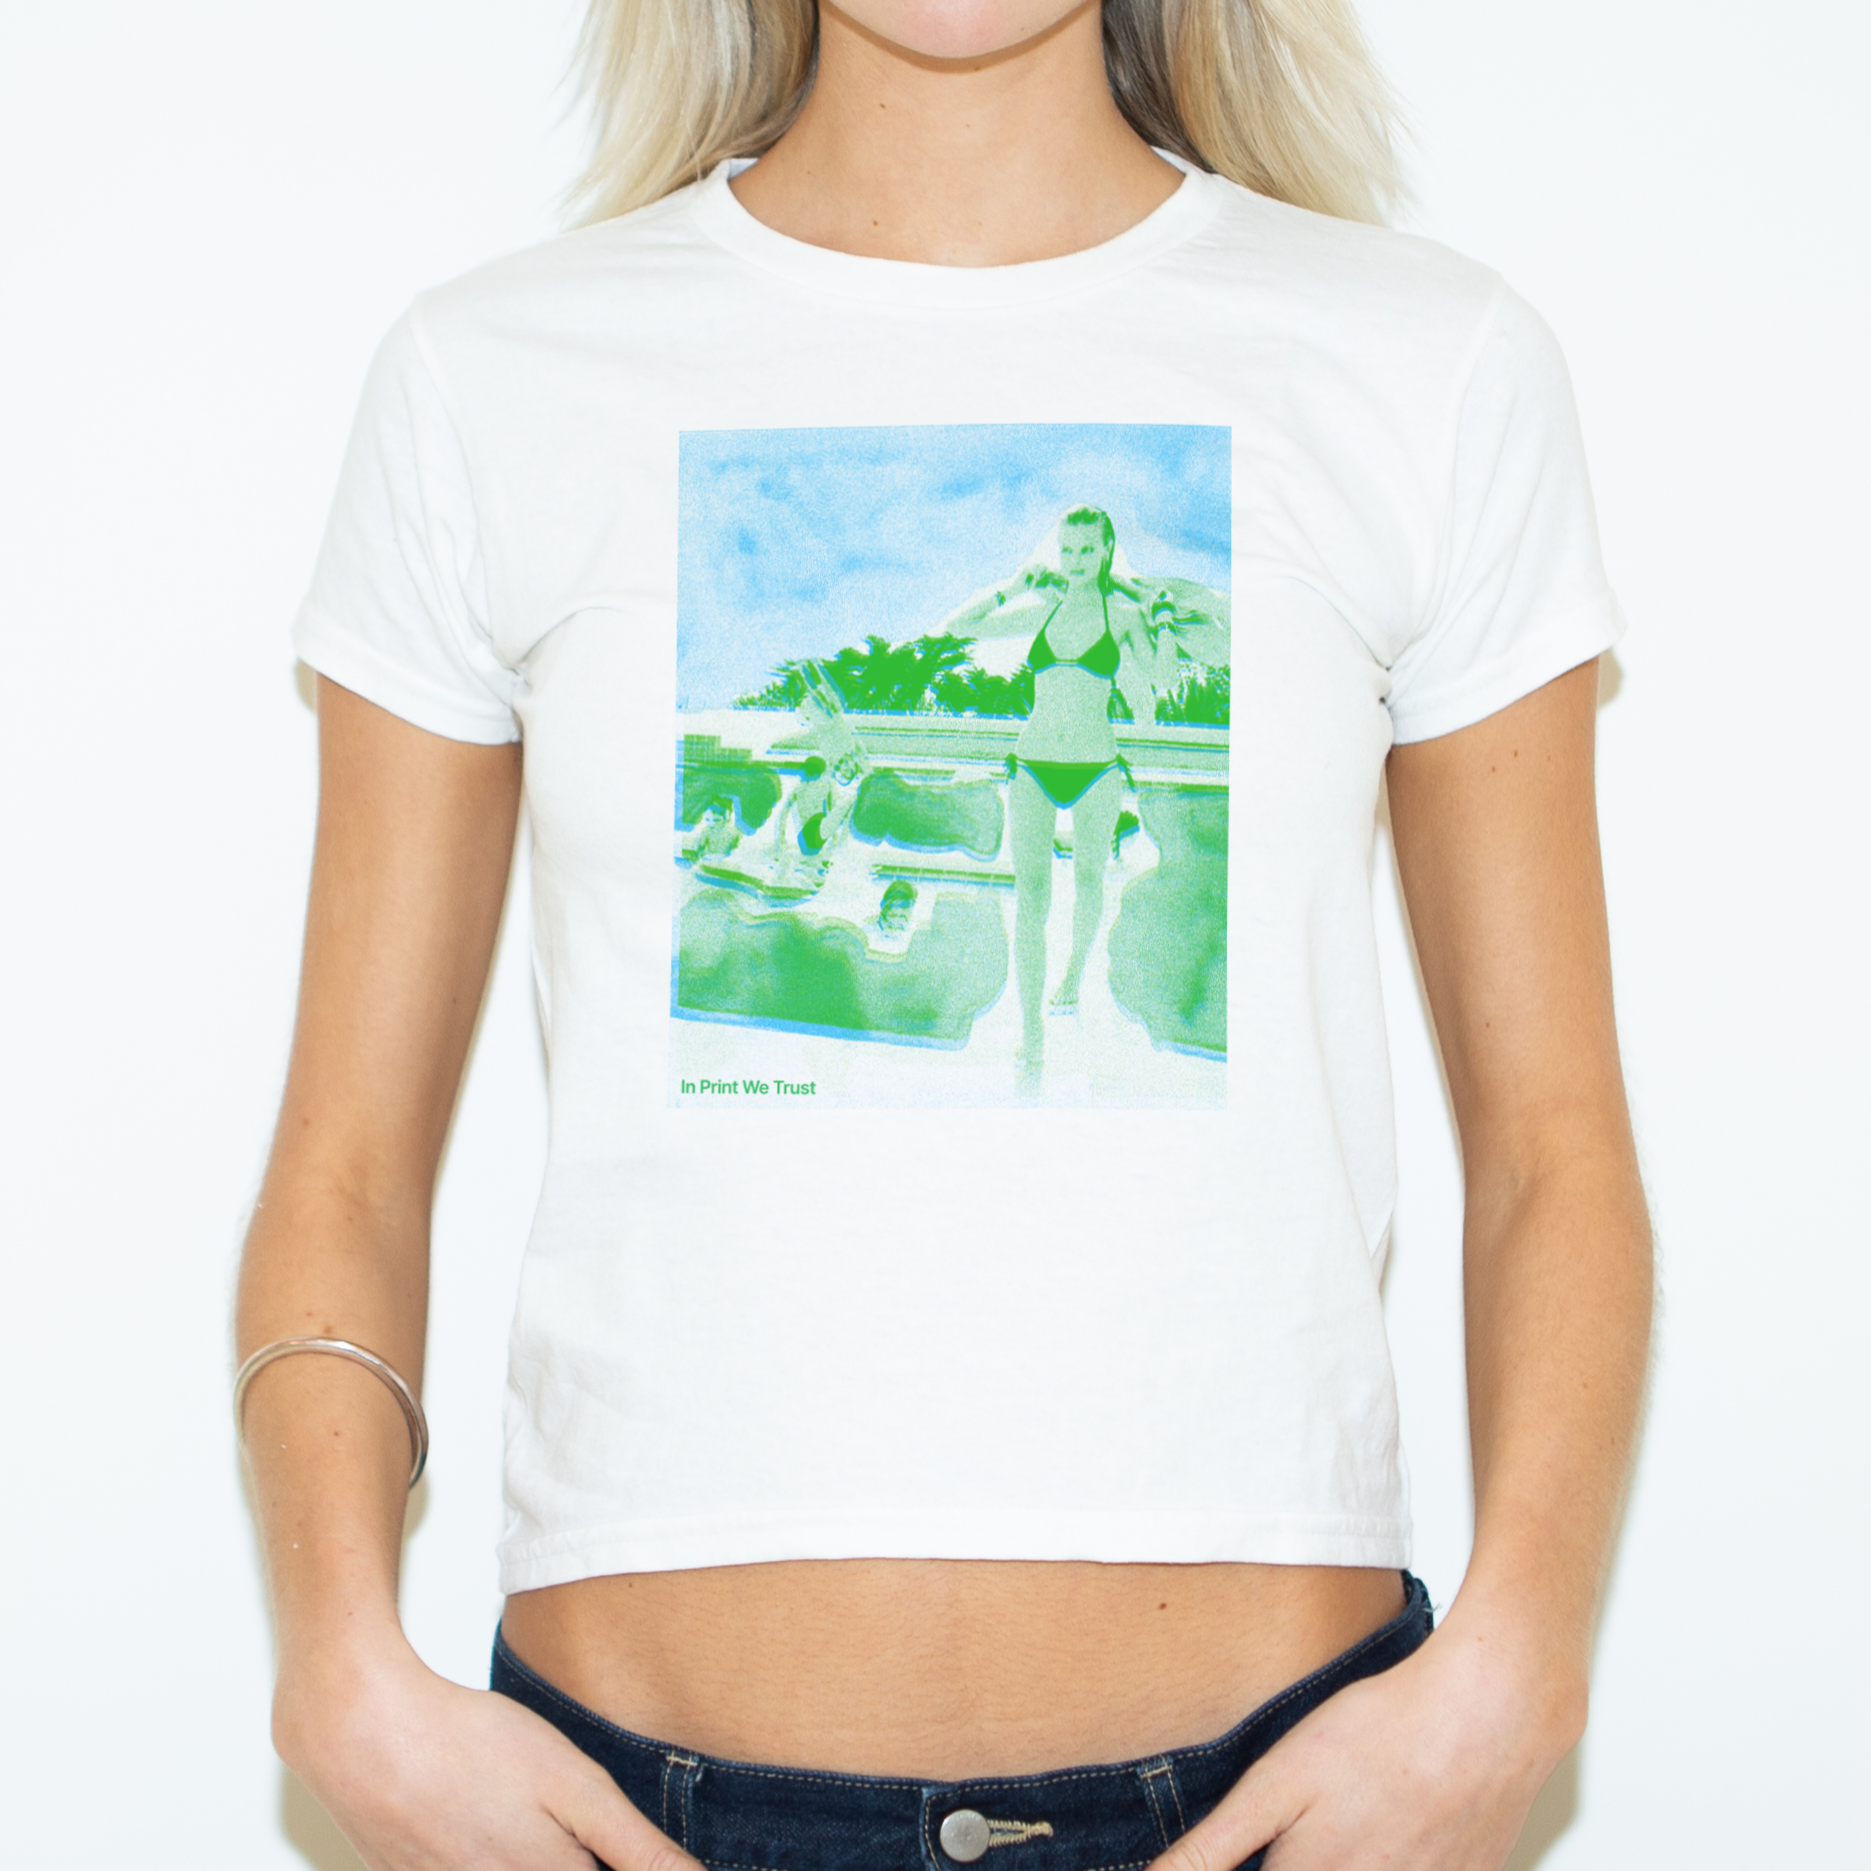 'A Dip in the Pool' baby tee